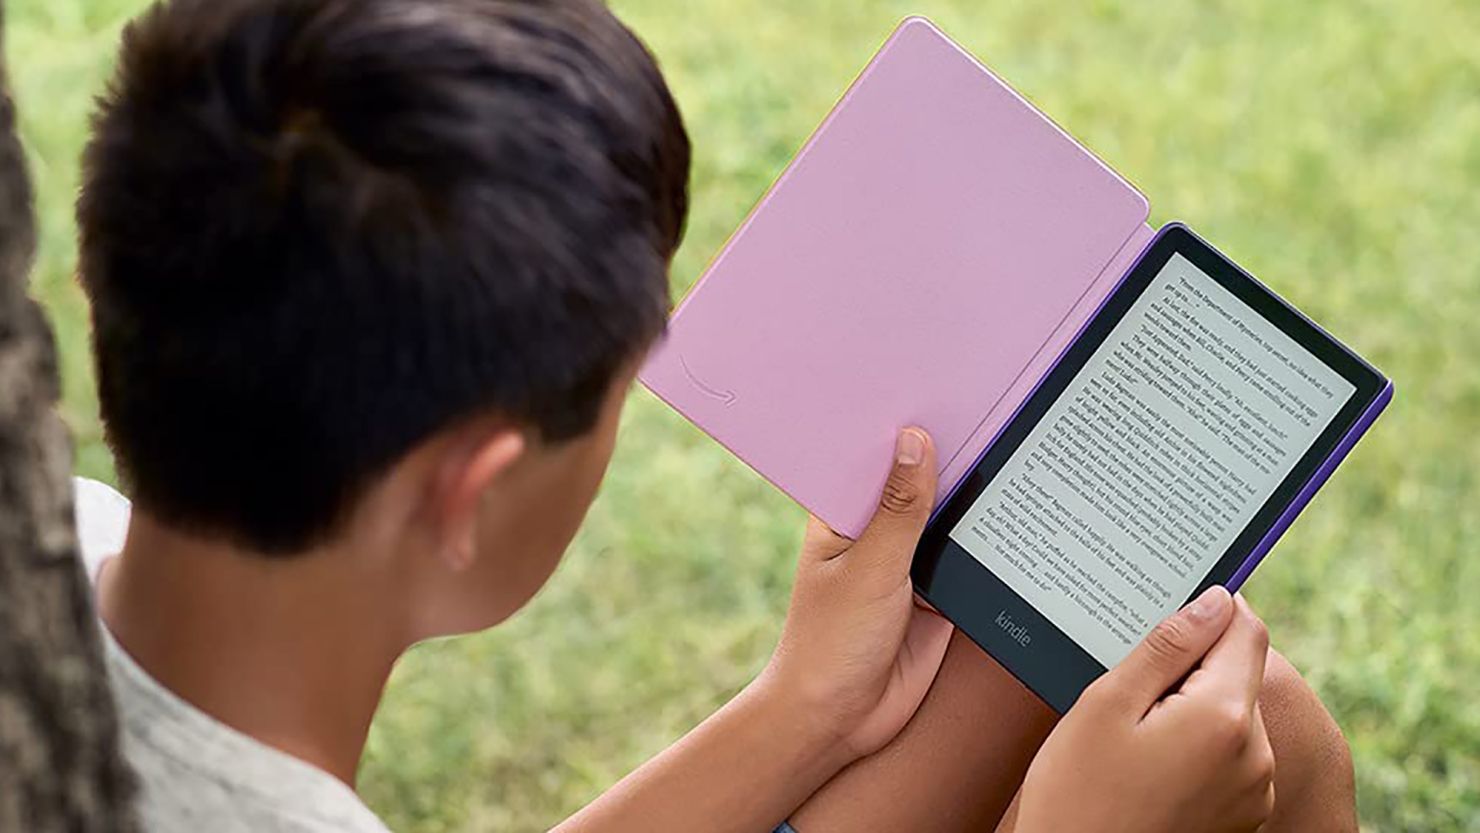 Kindle kids • Compare (20 products) find best prices »